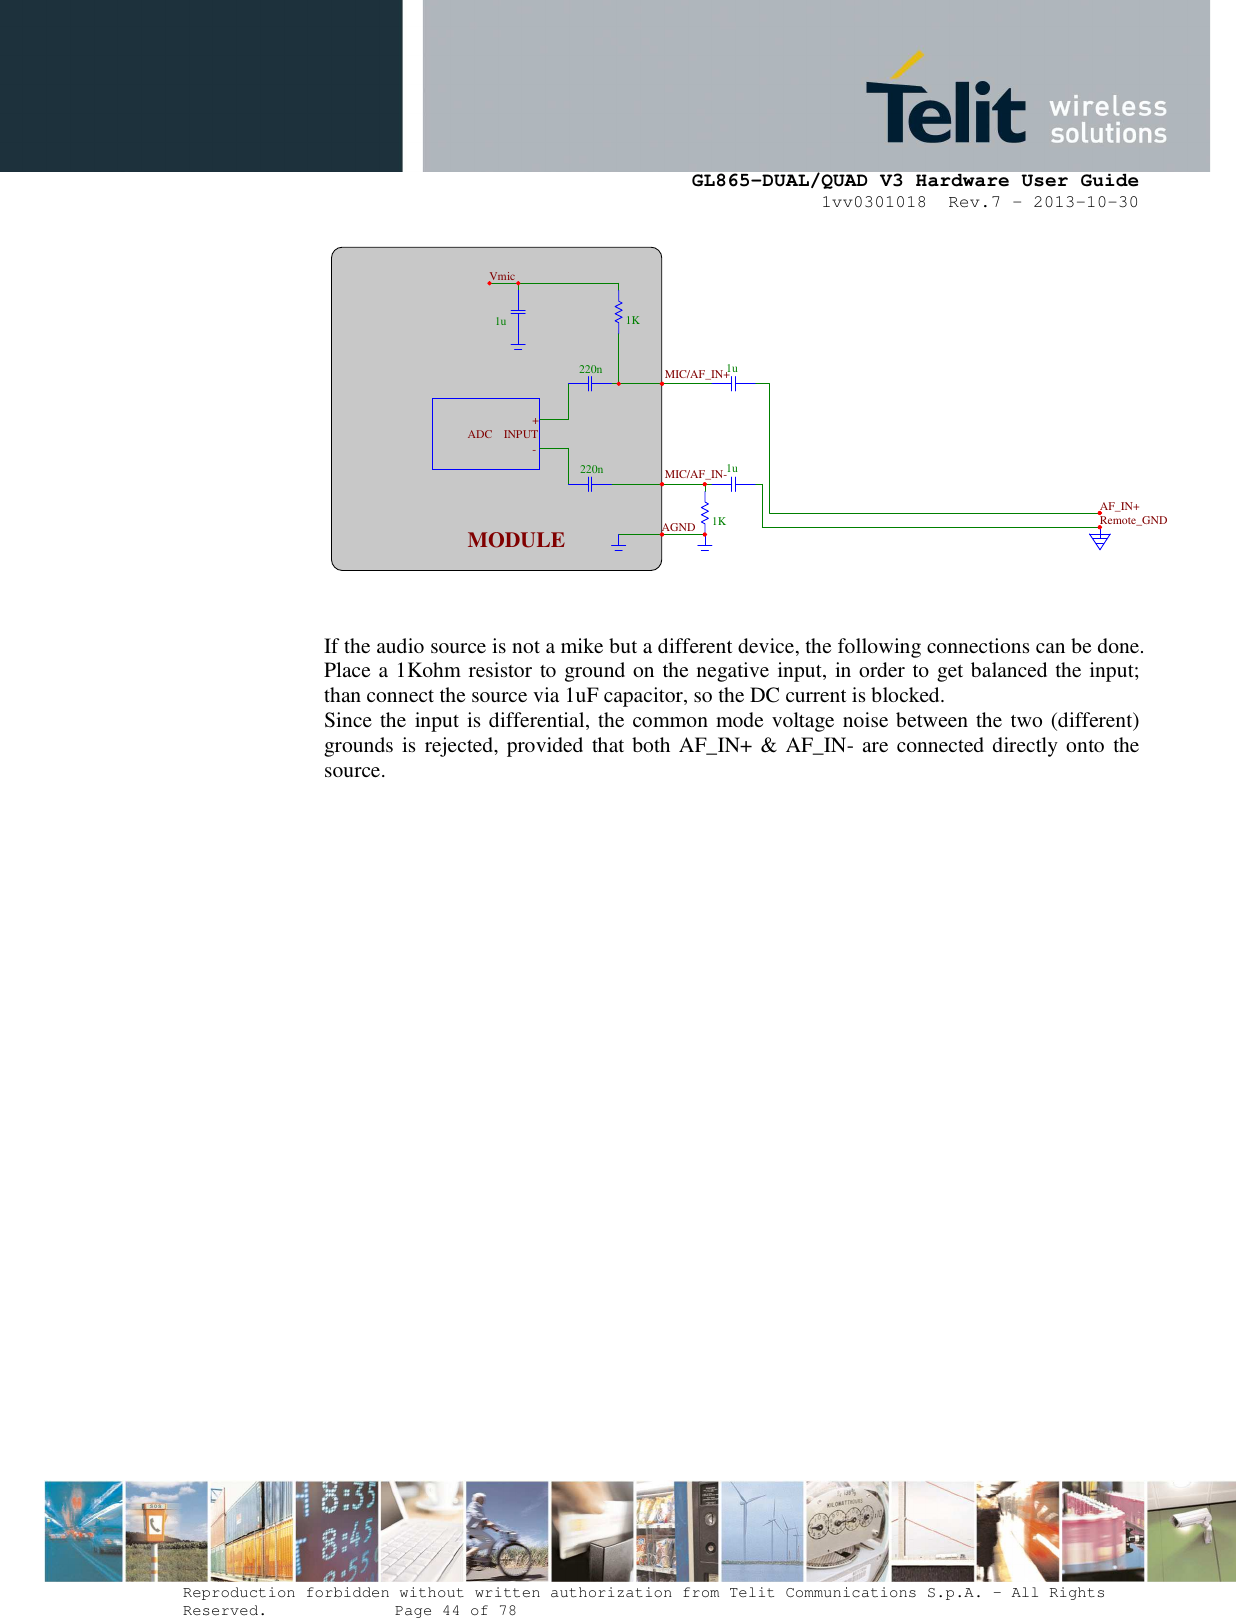      GL865-DUAL/QUAD V3 Hardware User Guide 1vv0301018  Rev.7 – 2013-10-30  Reproduction forbidden without written authorization from Telit Communications S.p.A. - All Rights Reserved.    Page 44 of 78 Mod. 0805 2011-07 Rev.2   If the audio source is not a mike but a different device, the following connections can be done. Place a 1Kohm resistor to ground on the negative input, in order to get balanced the input; than connect the source via 1uF capacitor, so the DC current is blocked. Since the input is differential, the common mode voltage noise between the two (different) grounds is rejected, provided that both AF_IN+ &amp; AF_IN- are connected directly onto the source. 1u220n220n1K 1K 1u 1u AF_IN+MIC/AF_IN+MIC/AF_IN-AGNDMODULE -+INPUTADCVmicRemote_GND